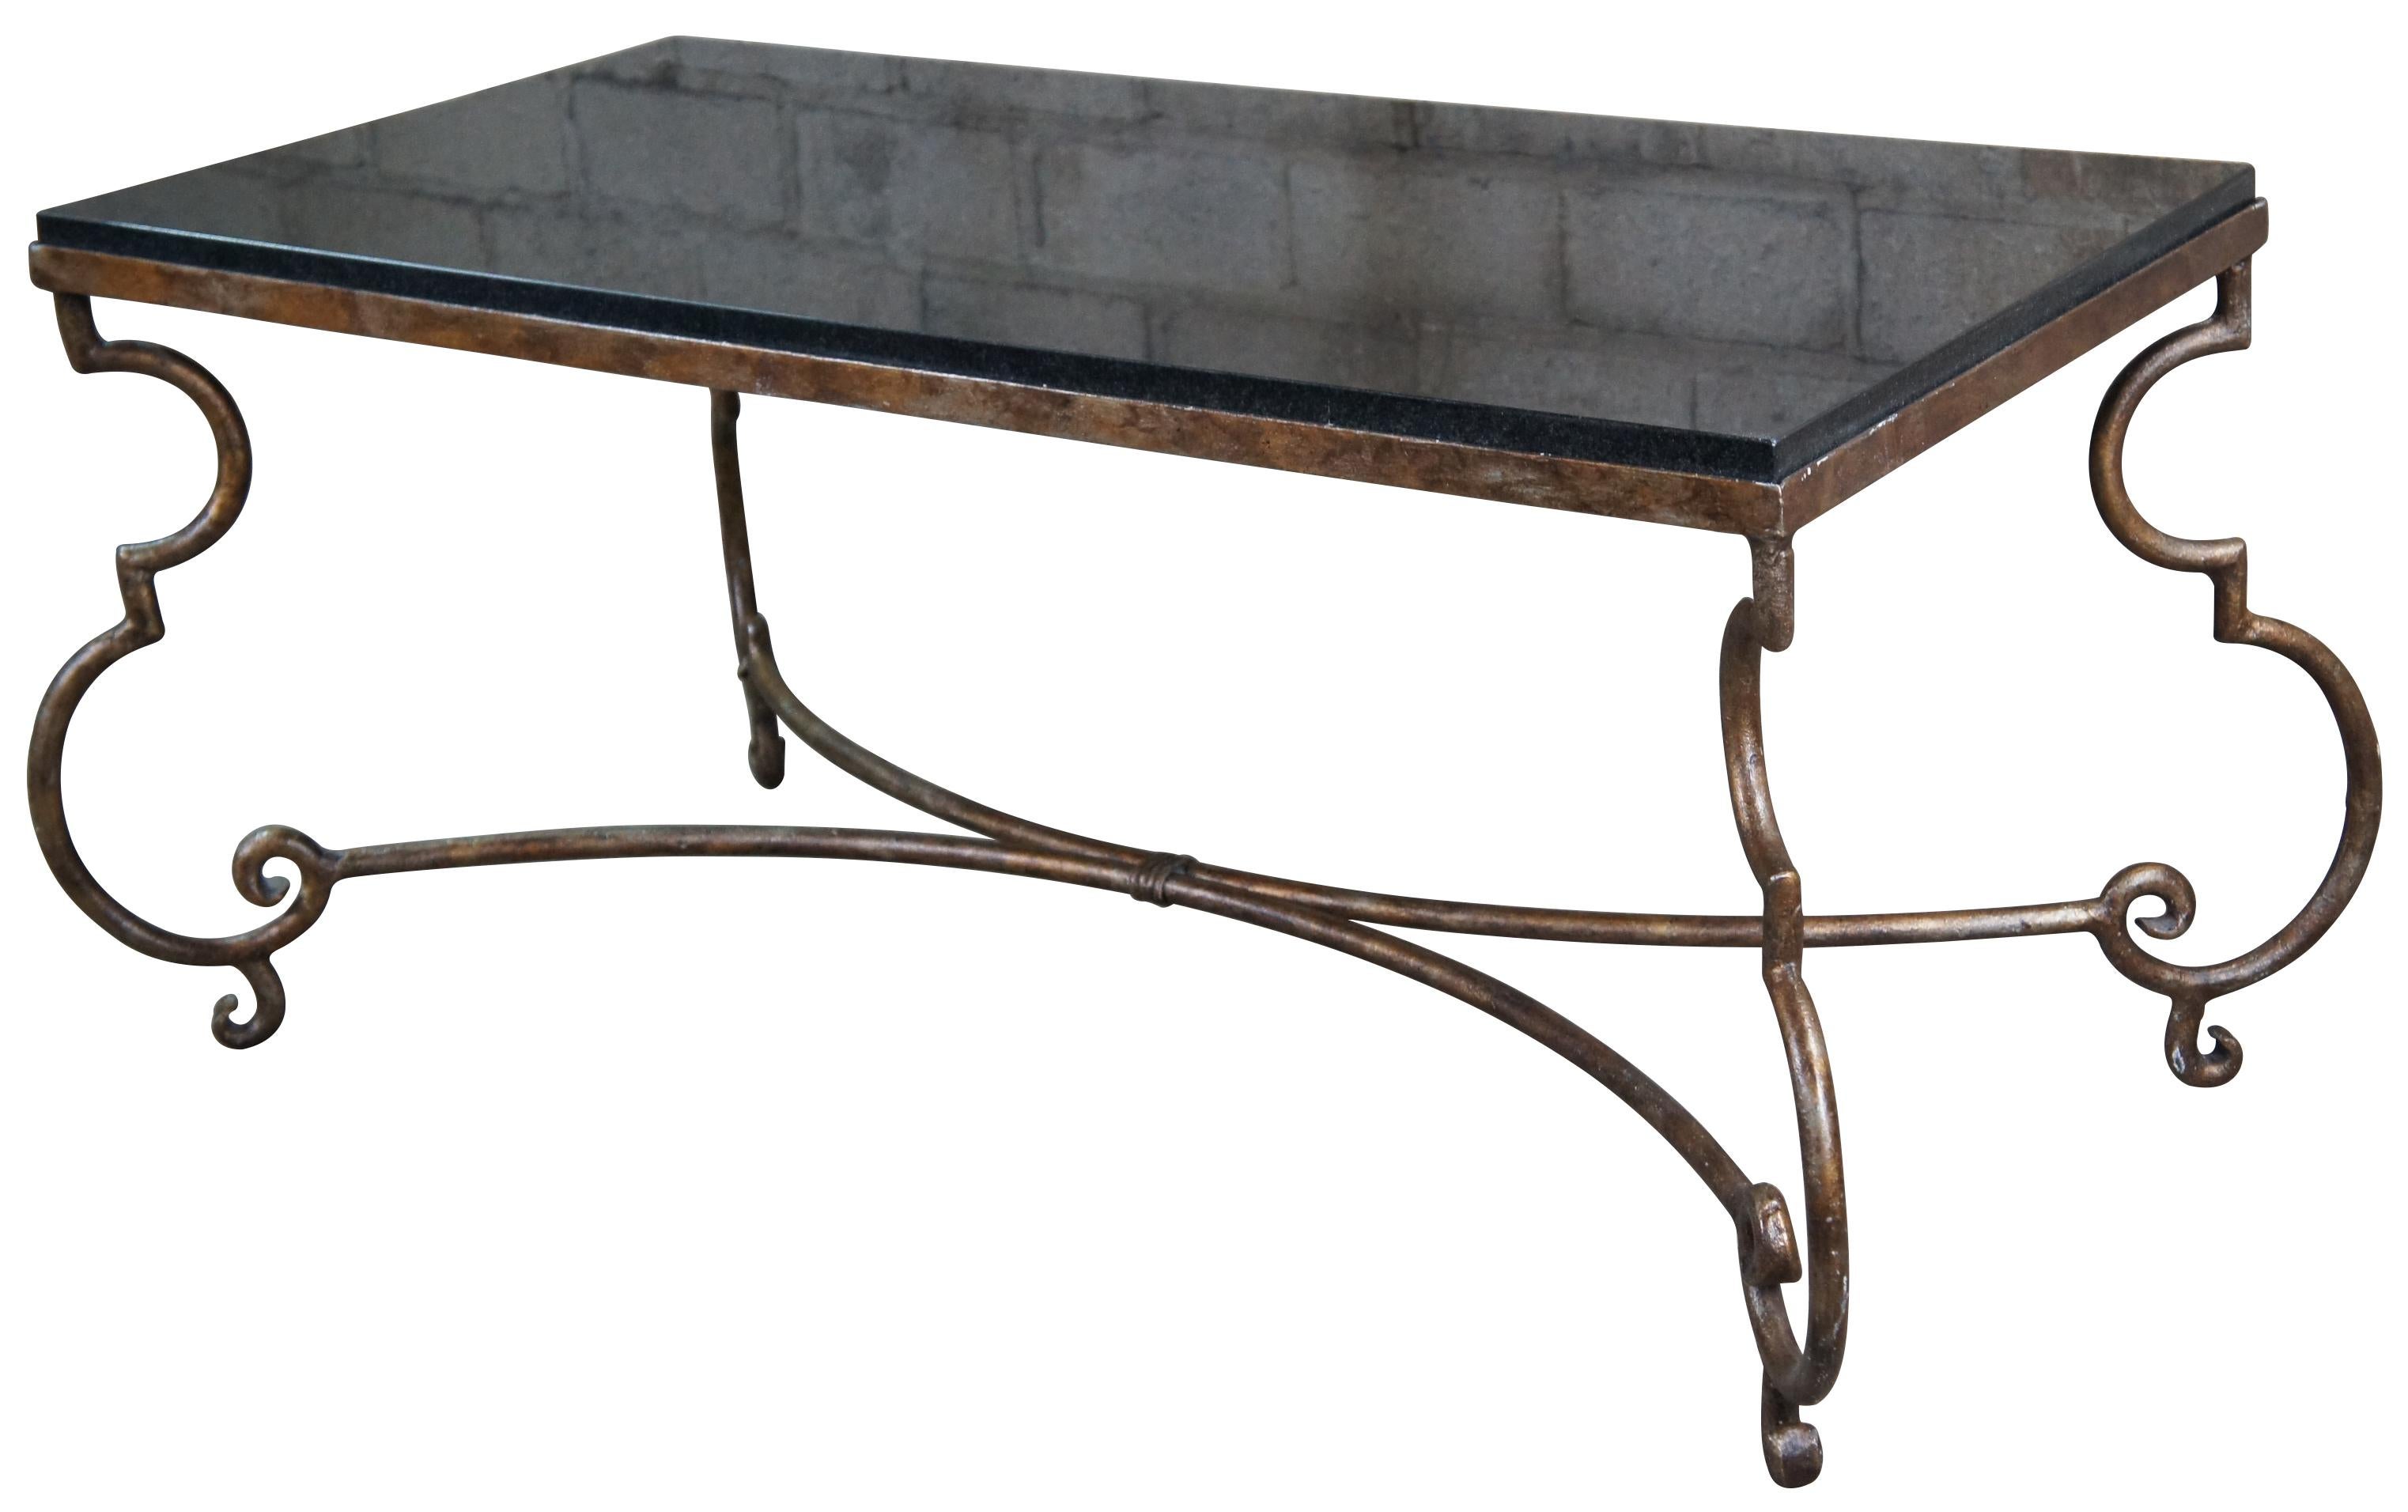 Vintage heavy rectangular coffee table featuring dark granite top and scrolled iron rustic gold painted base.

Measures: Top 43.25